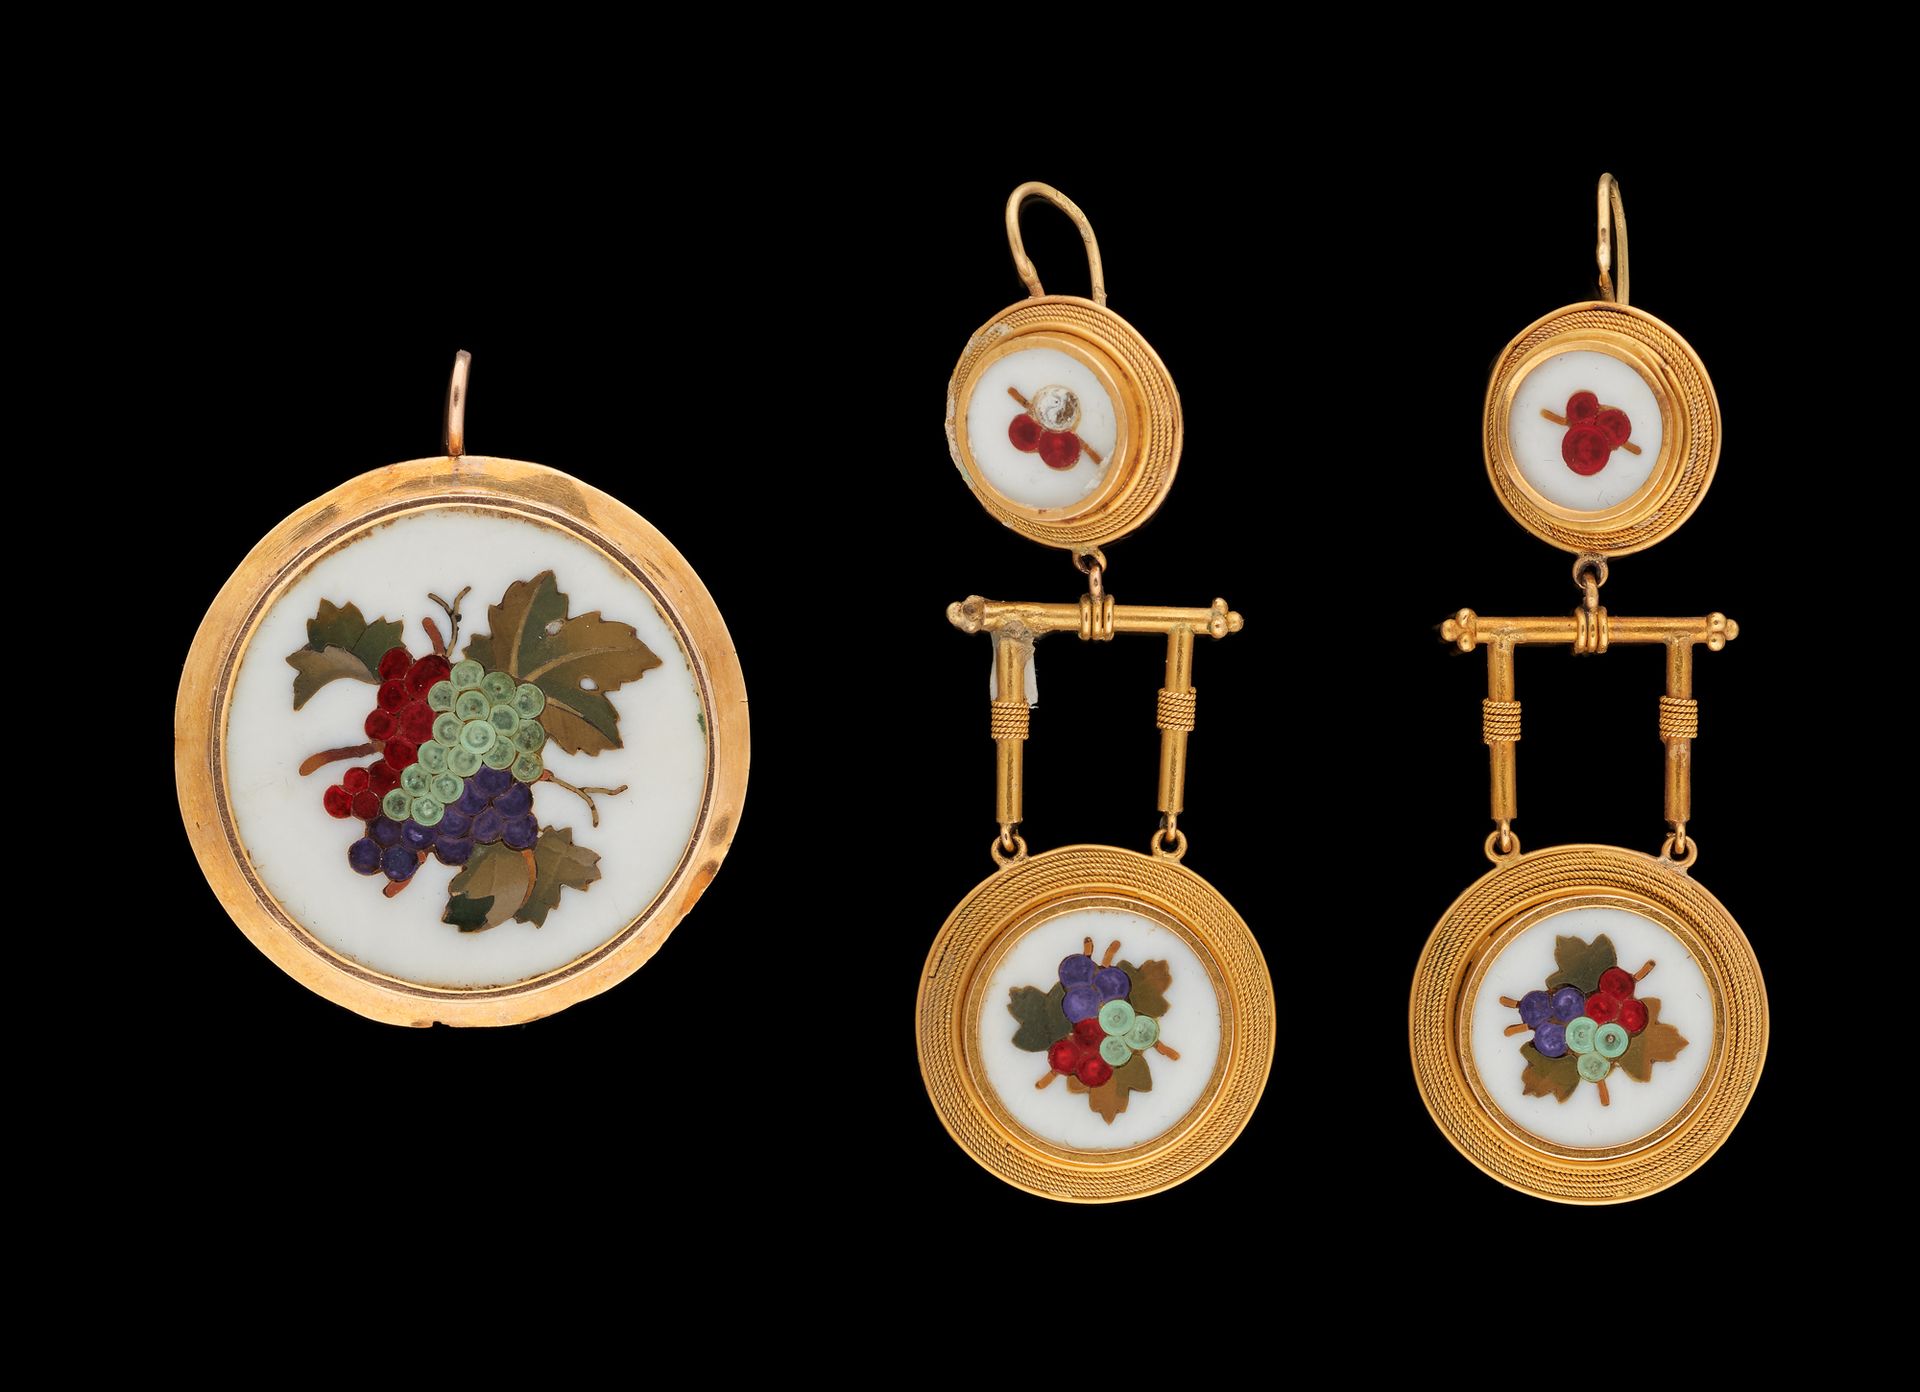 Circa 1870. 
Jewelry: Lot consisting of a pair of earrings and a pendant in yell&hellip;